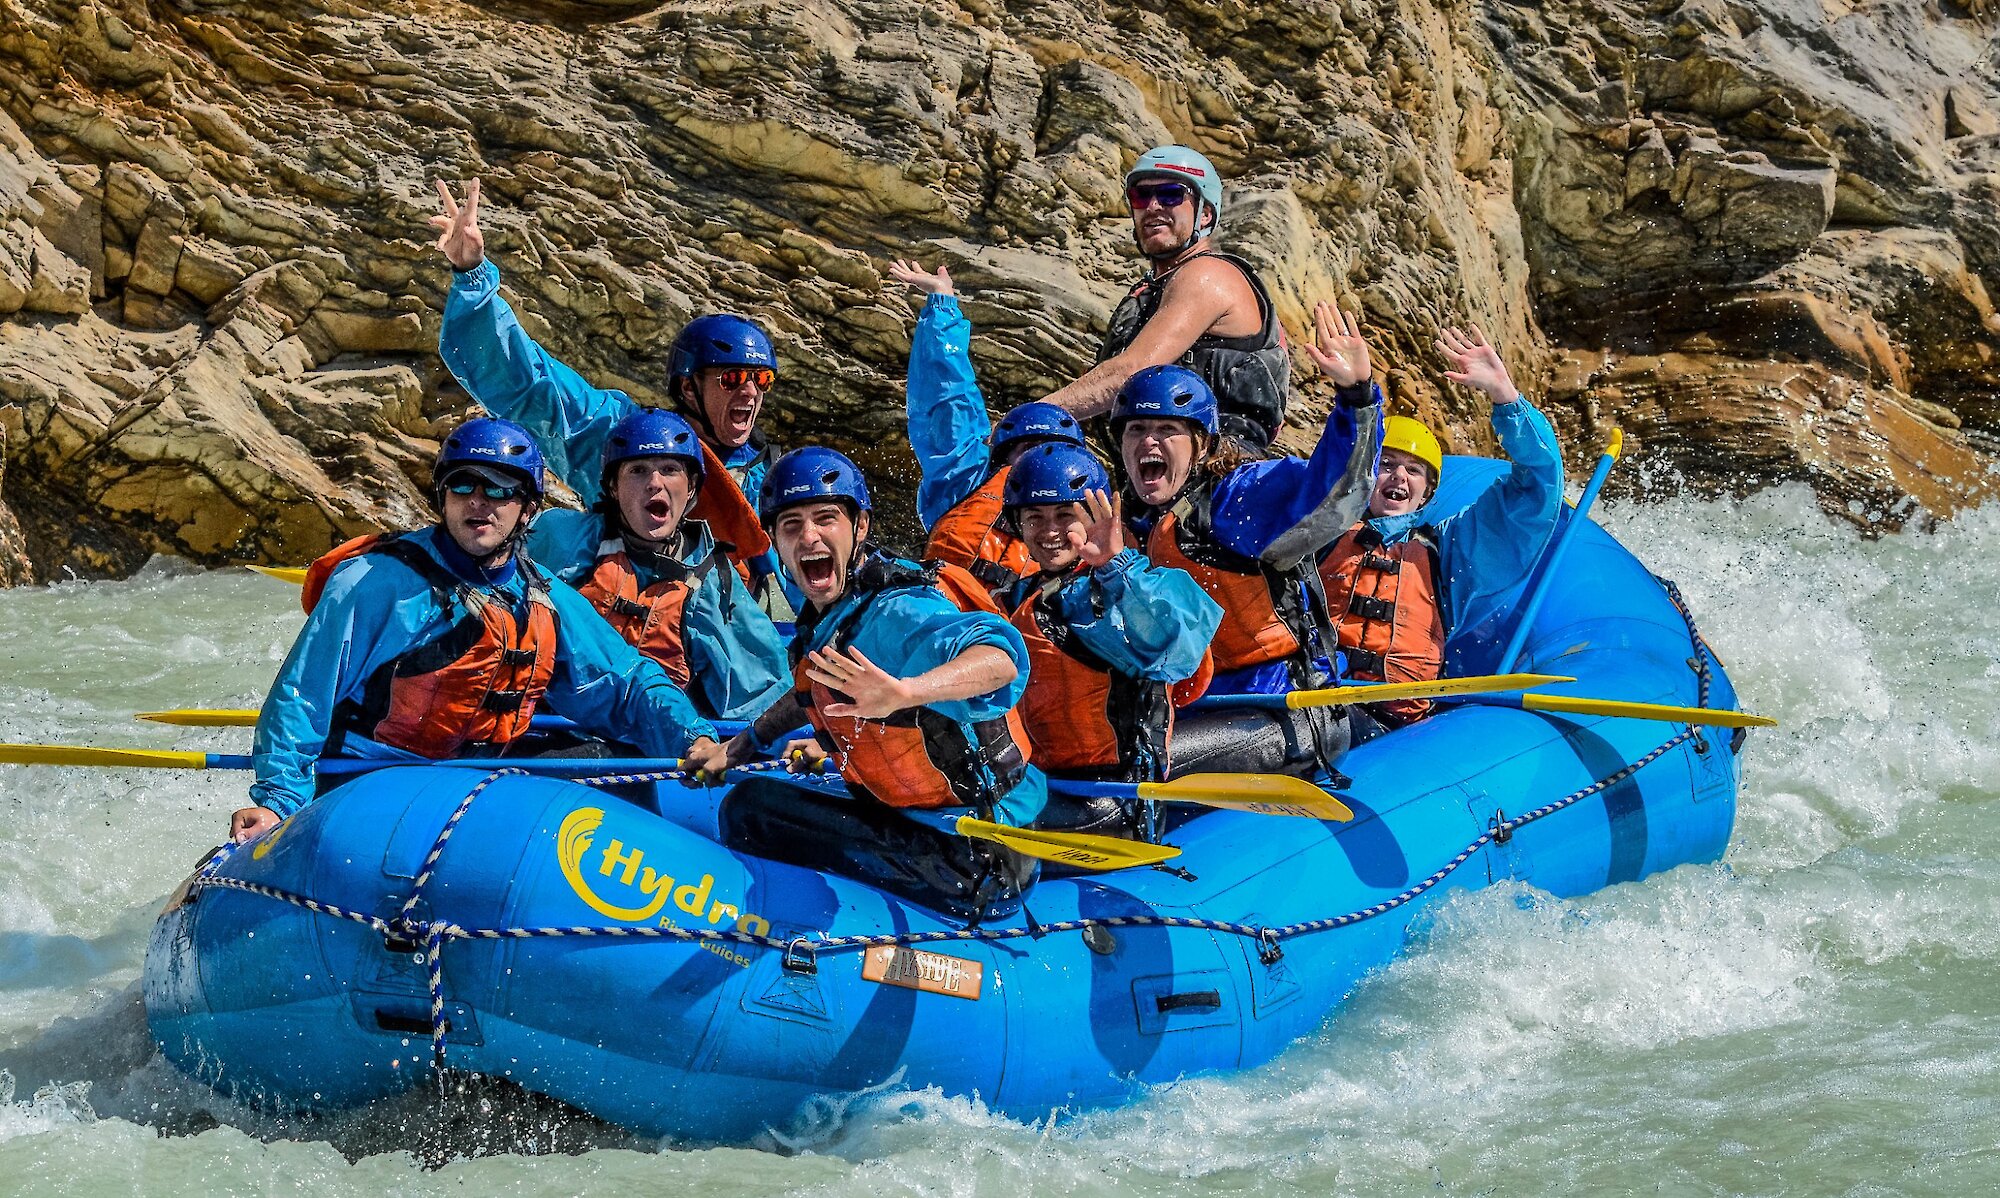 Rafters getting soaked on the Kicking Horse River trip